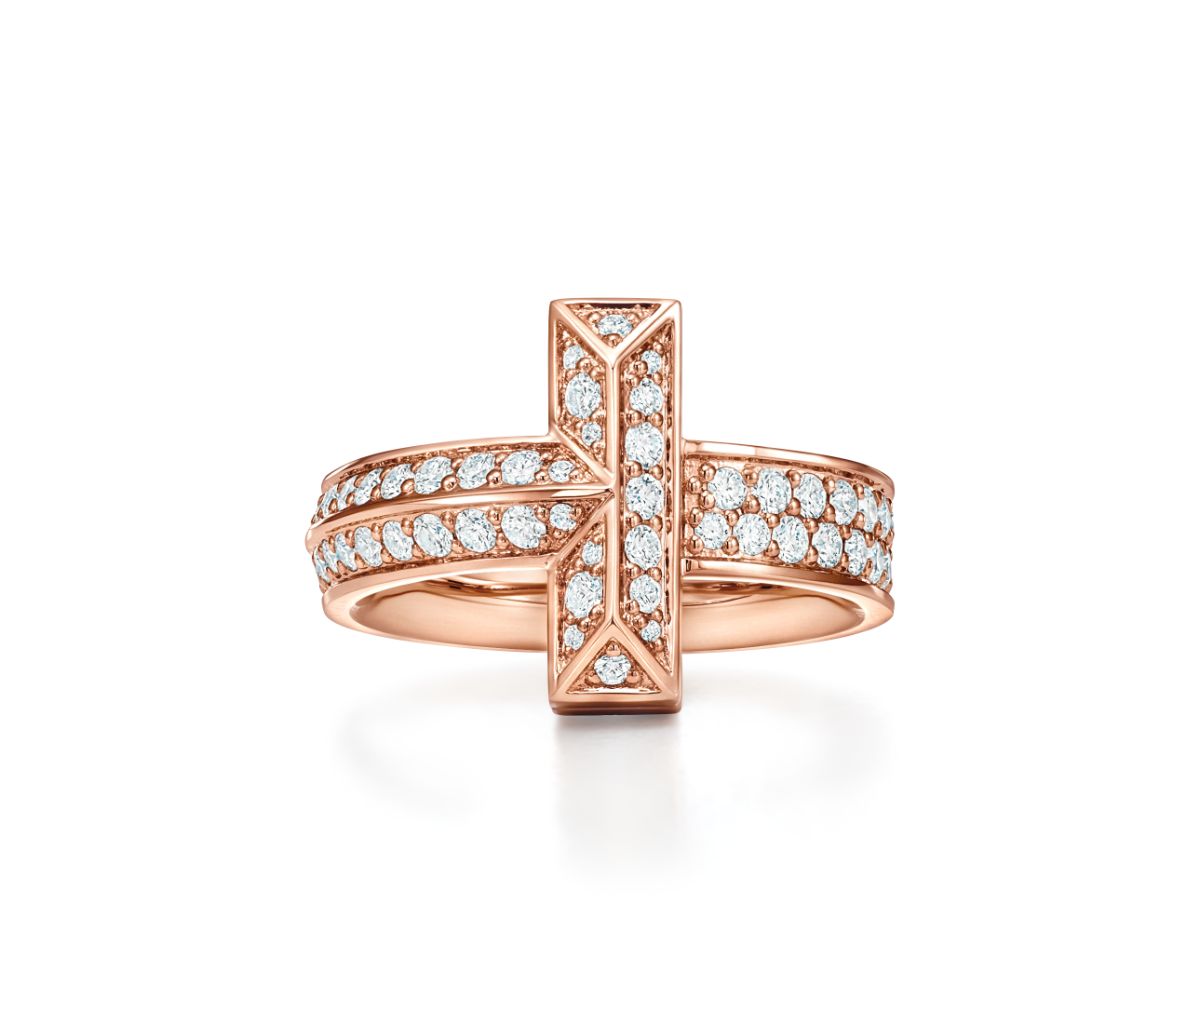 Tiffany And Co Tiffany And Co Debuts New T Collection Tiffany T1